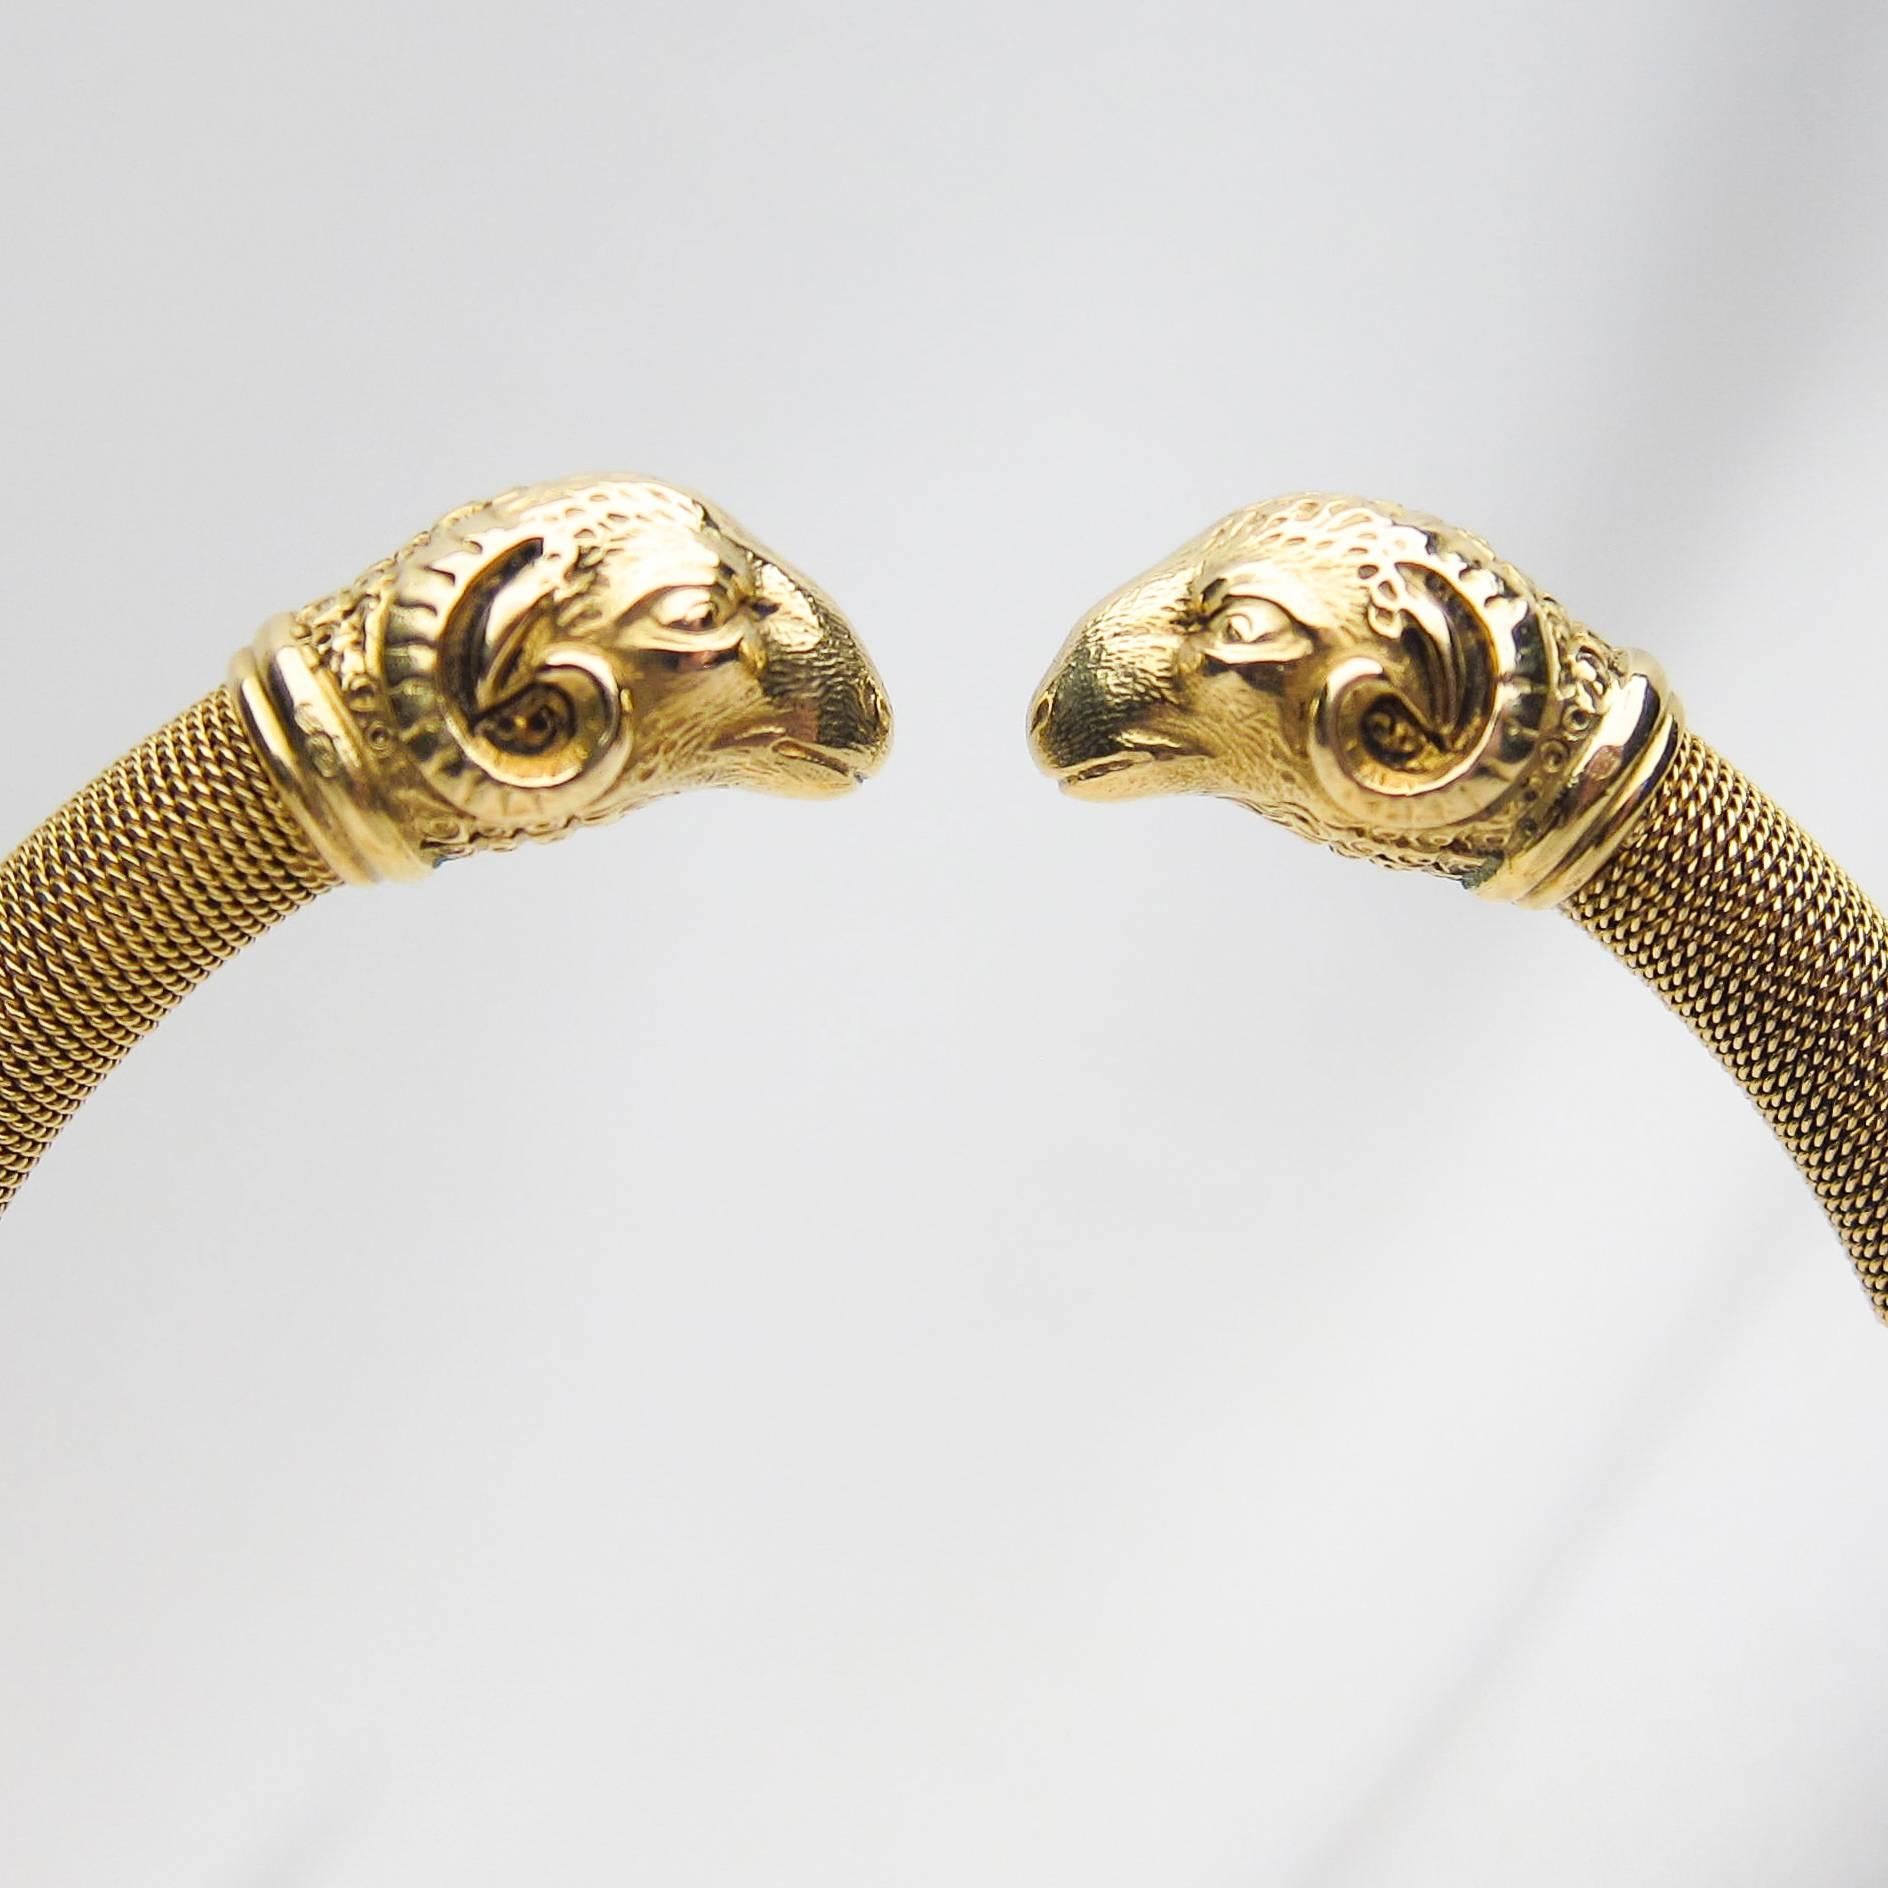 Late Victorian 18 Karat Gold Ram's Head Bangle Bracelet In Excellent Condition For Sale In Seattle, WA